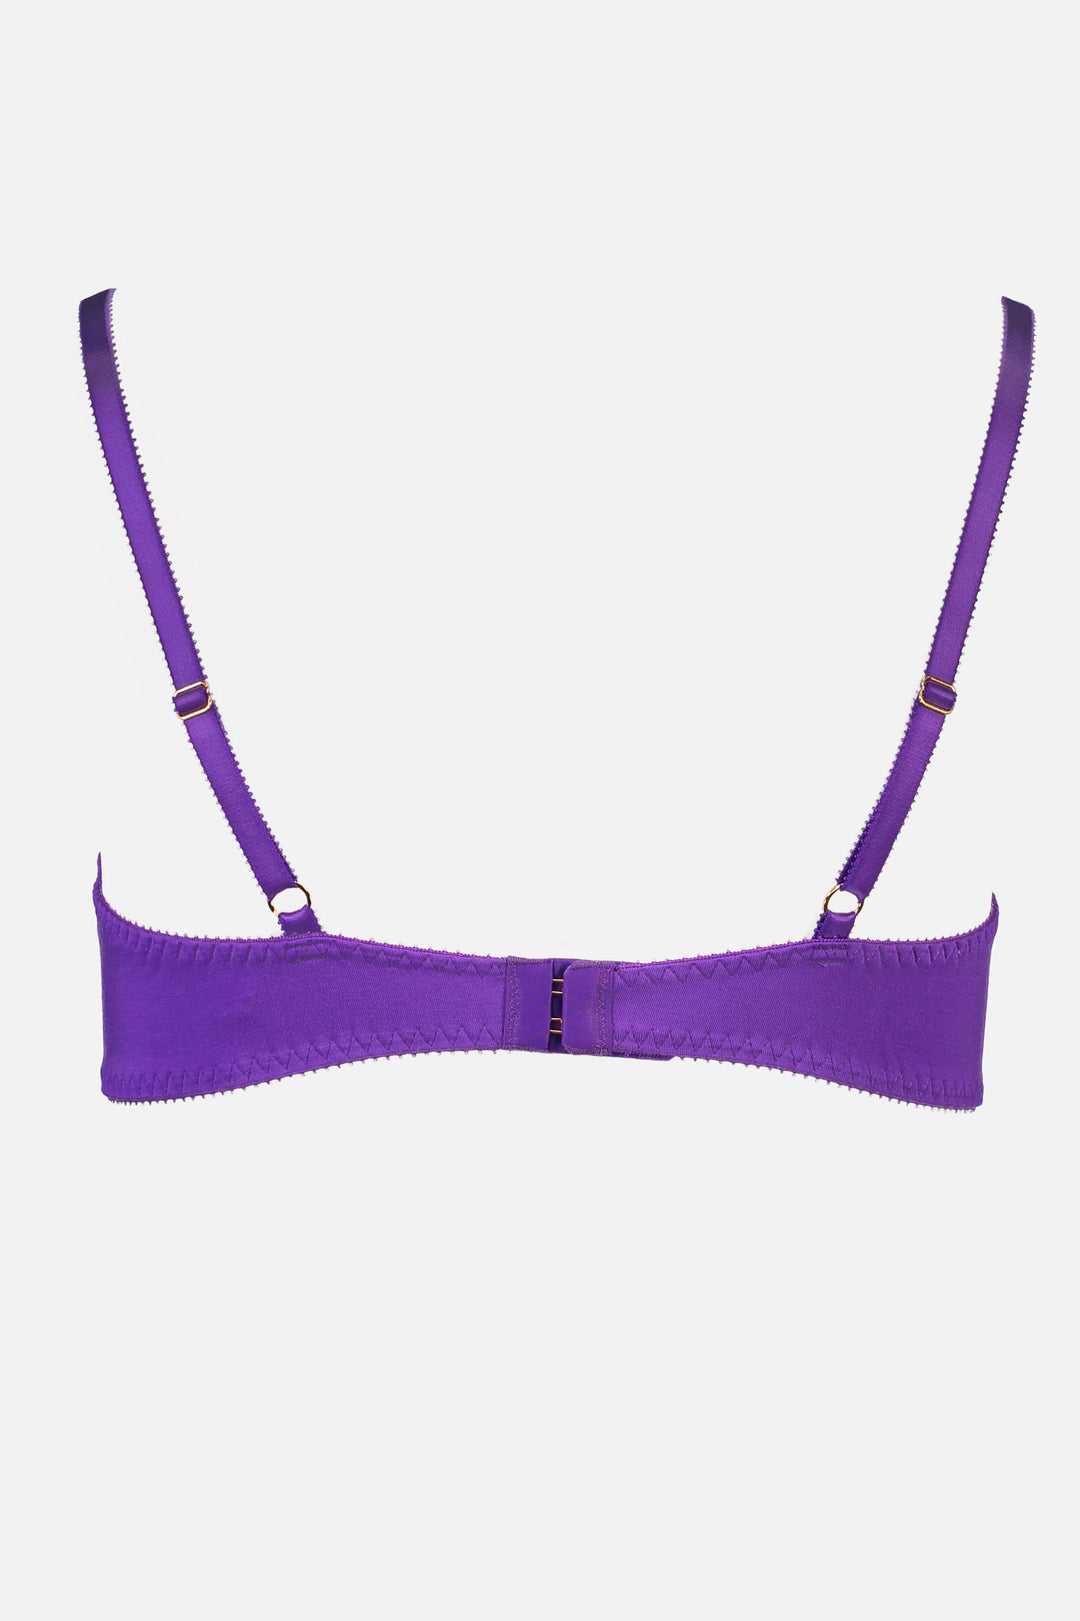 Videris Lingerie Maggie wire free soft cup bra in purple TENCEL™ with adjustable back straps and hook and eyes closure